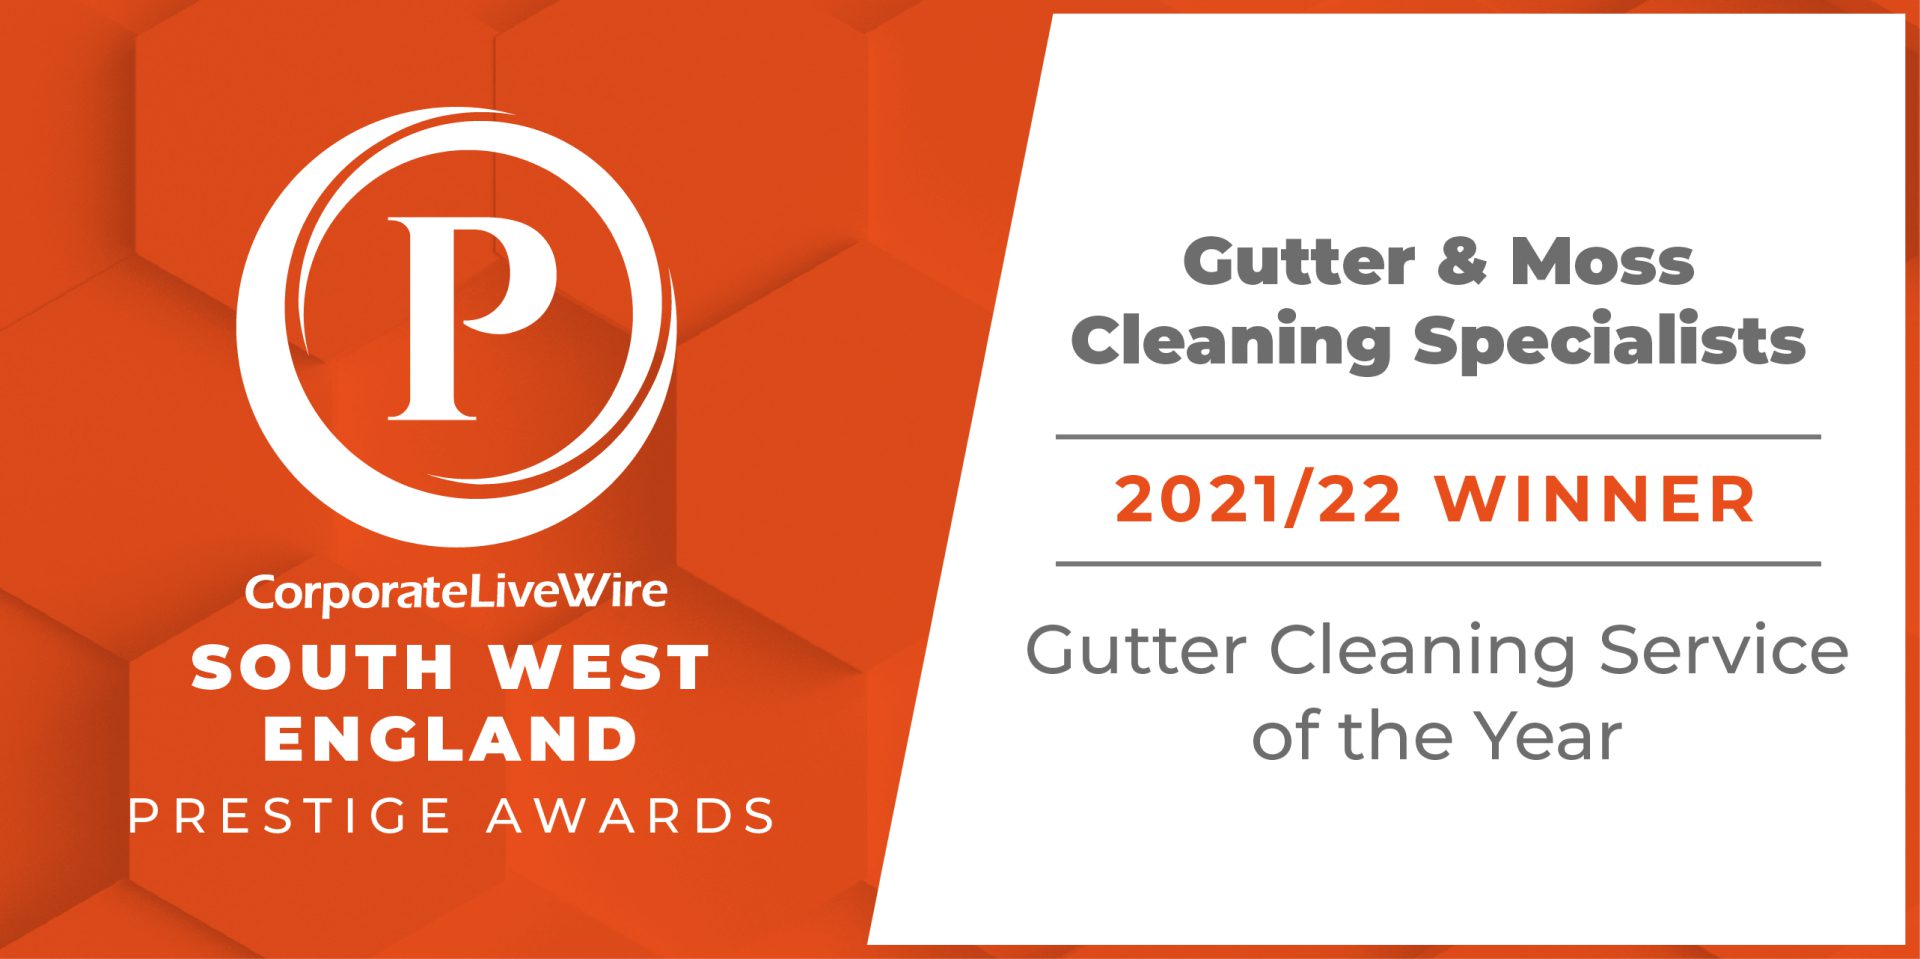 Gutter and moss cleaning specialists 2021 - 2022 award plaque